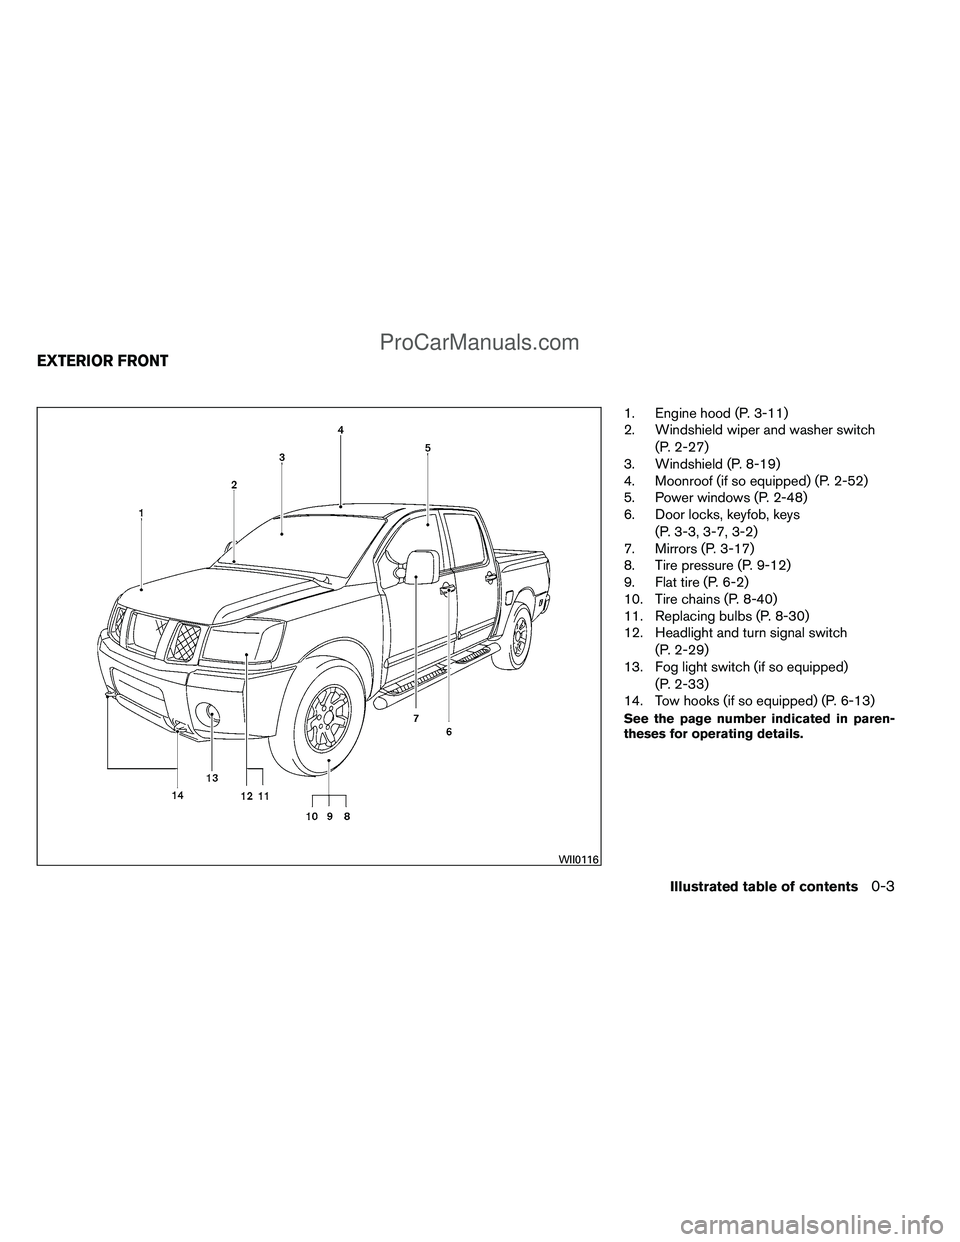 NISSAN TITAN 2012  Owners Manual 1. Engine hood (P. 3-11)
2. Windshield wiper and washer switch(P. 2-27)
3. Windshield (P. 8-19)
4. Moonroof (if so equipped) (P. 2-52)
5. Power windows (P. 2-48)
6. Door locks, keyfob, keys
(P. 3-3, 3